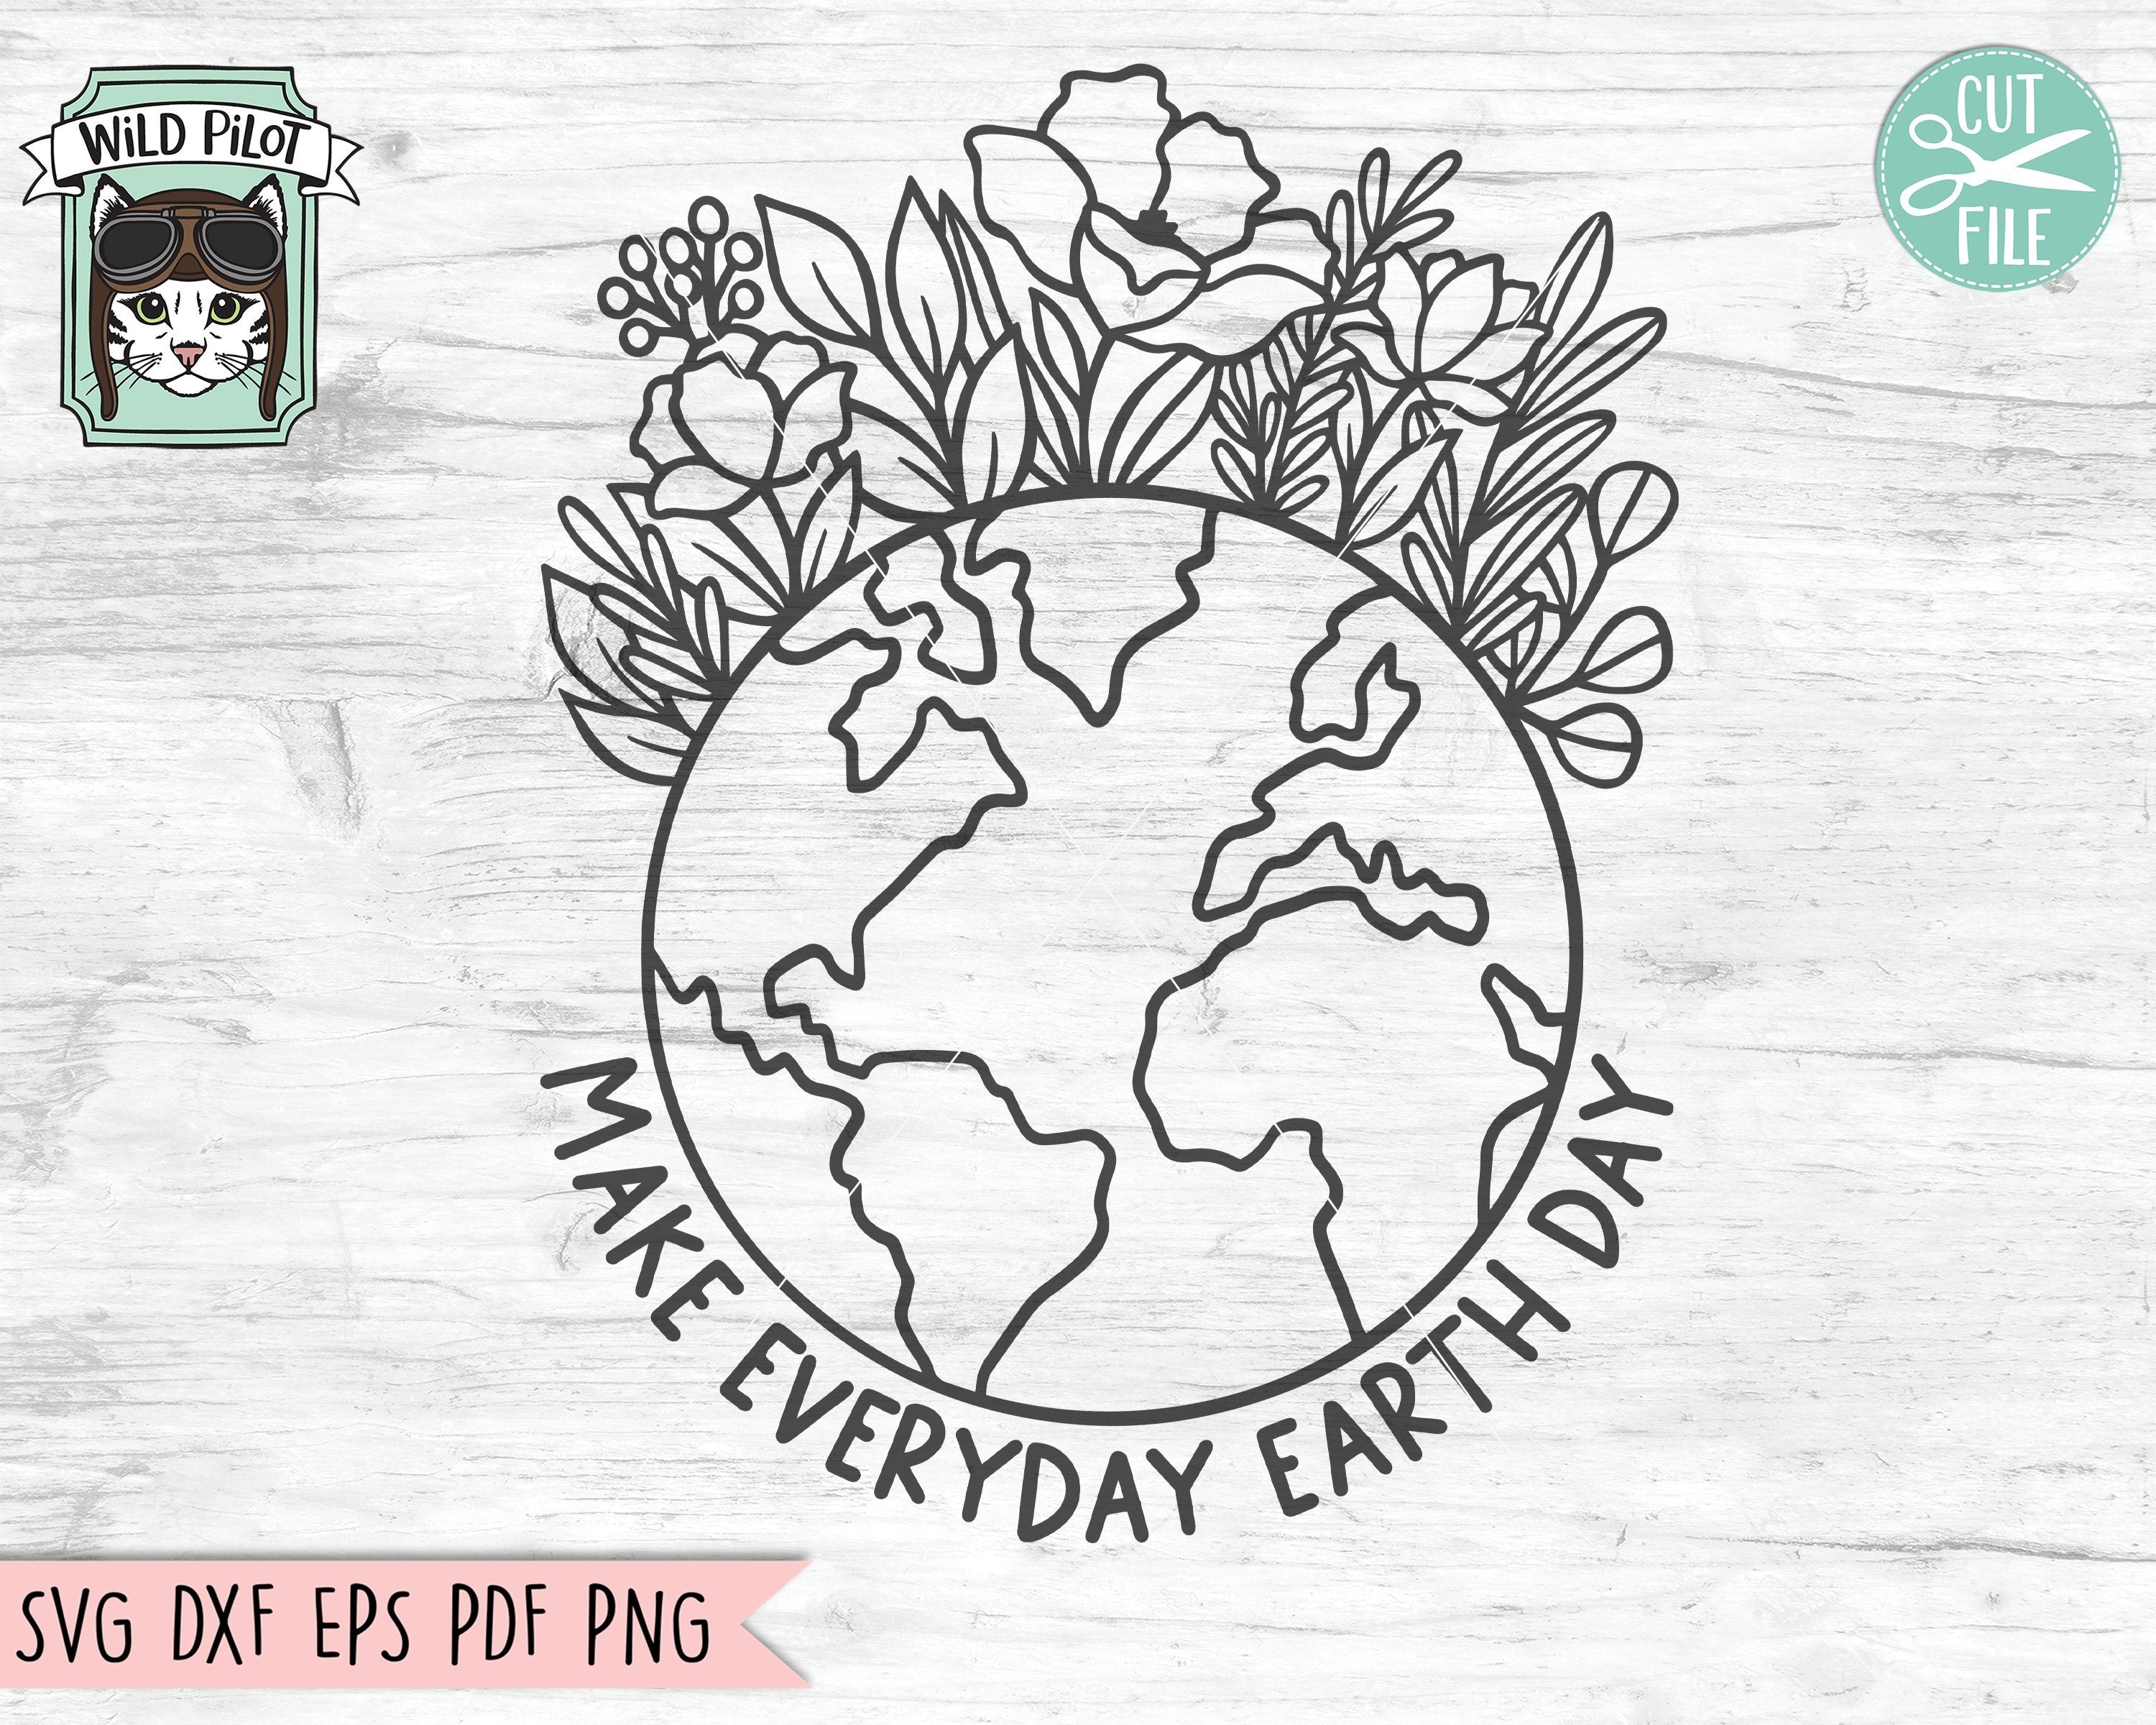 Planet Earth Surrounded by Flowers SVG Cut file by Creative